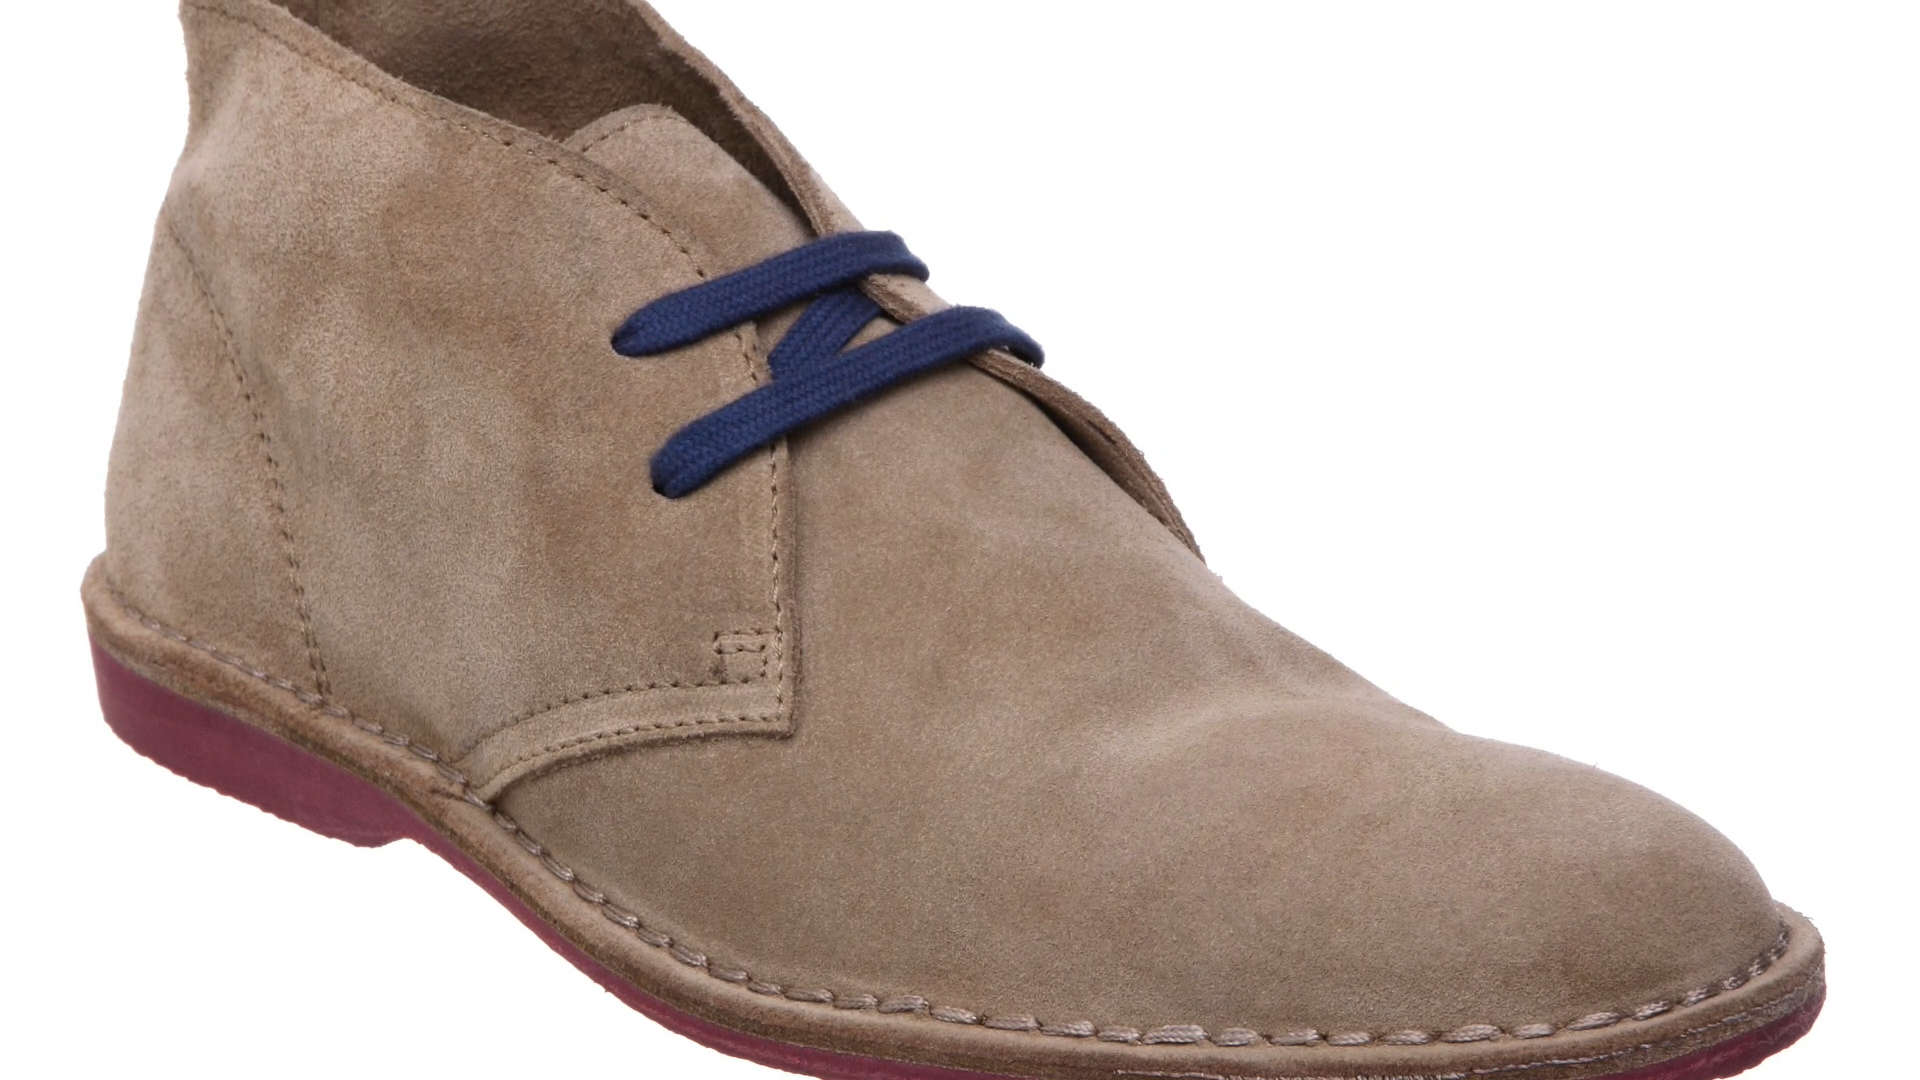 Photo of Buff chukka boot with cobalt blue shoe laces for a more casual look